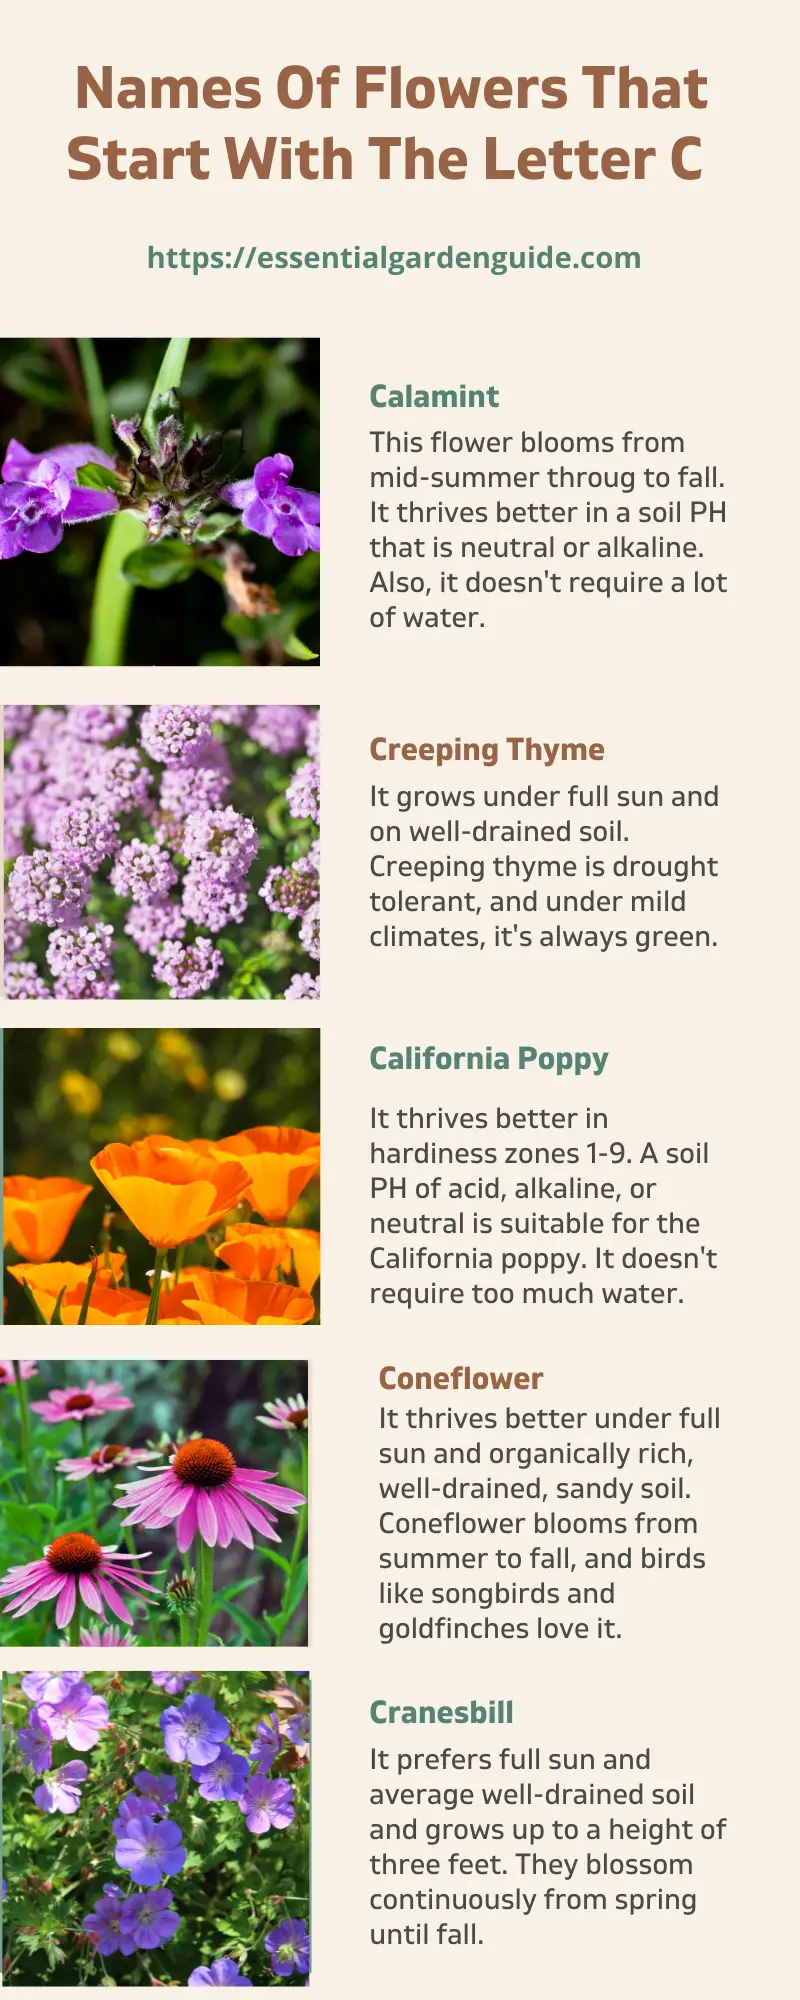 Names of flowers that start with the letter c